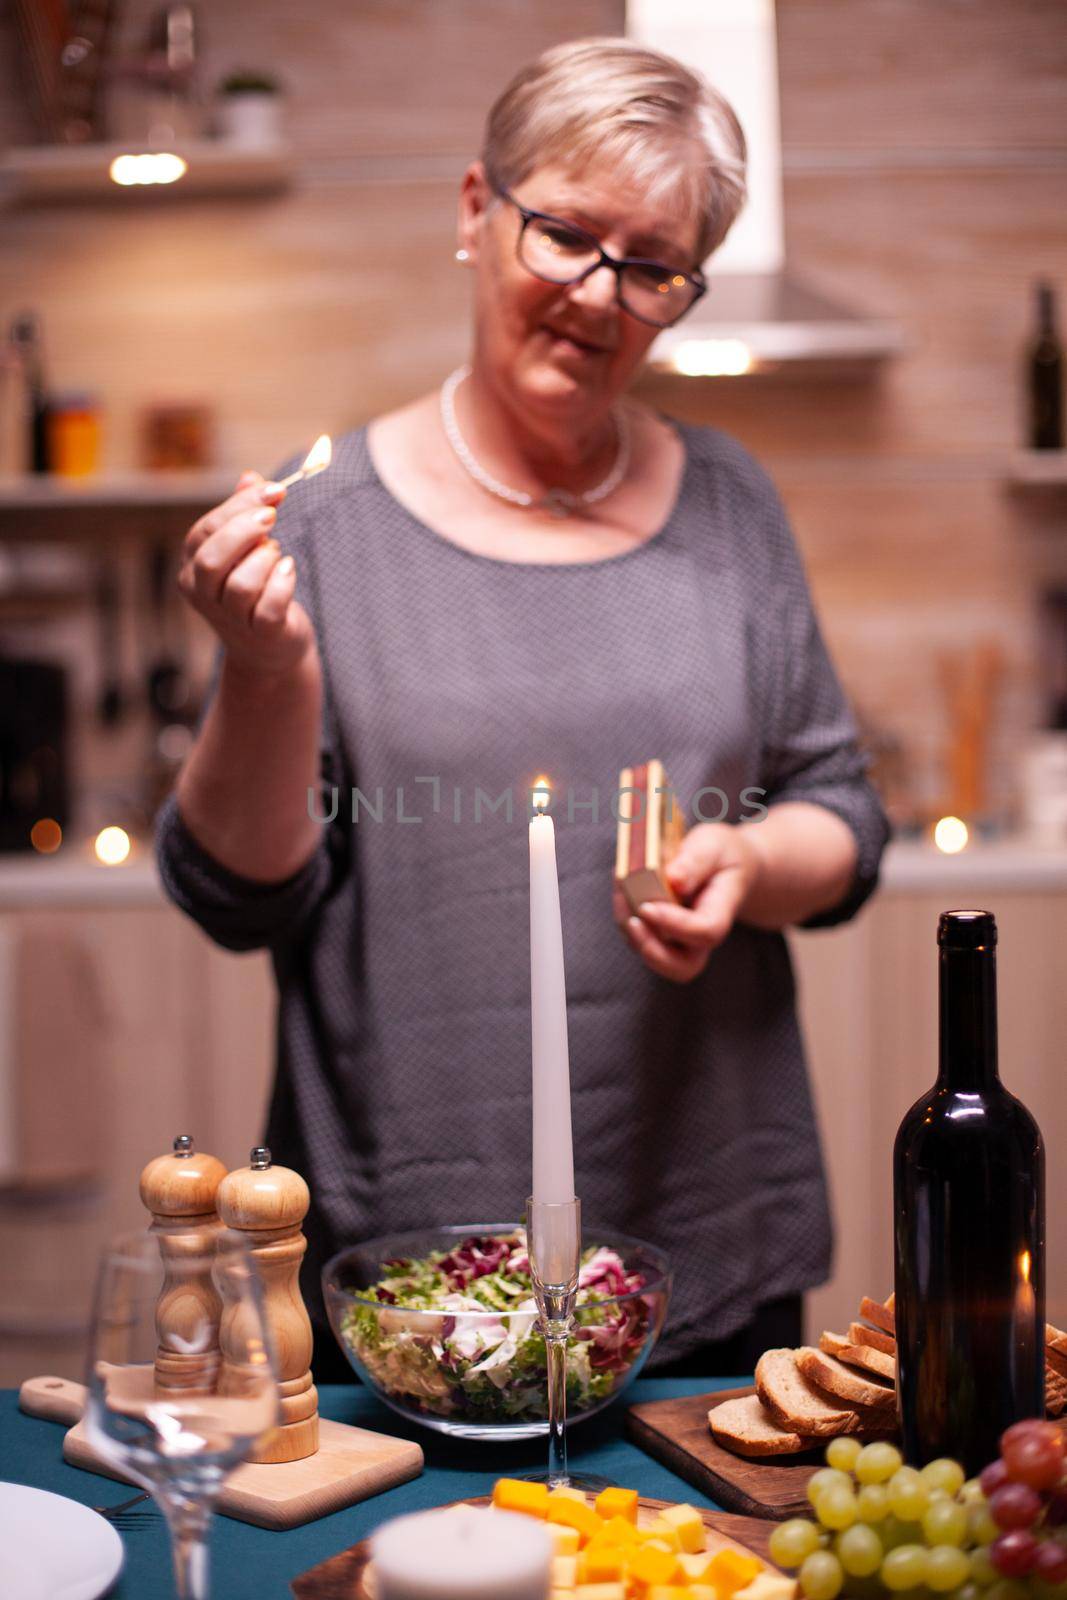 Wife looking at burning candle while preparing table for romantic dinner with husband. Elderly woman waiting her husband for a romantic dinner. Mature wife preparing festive meal for anniversary celebration.